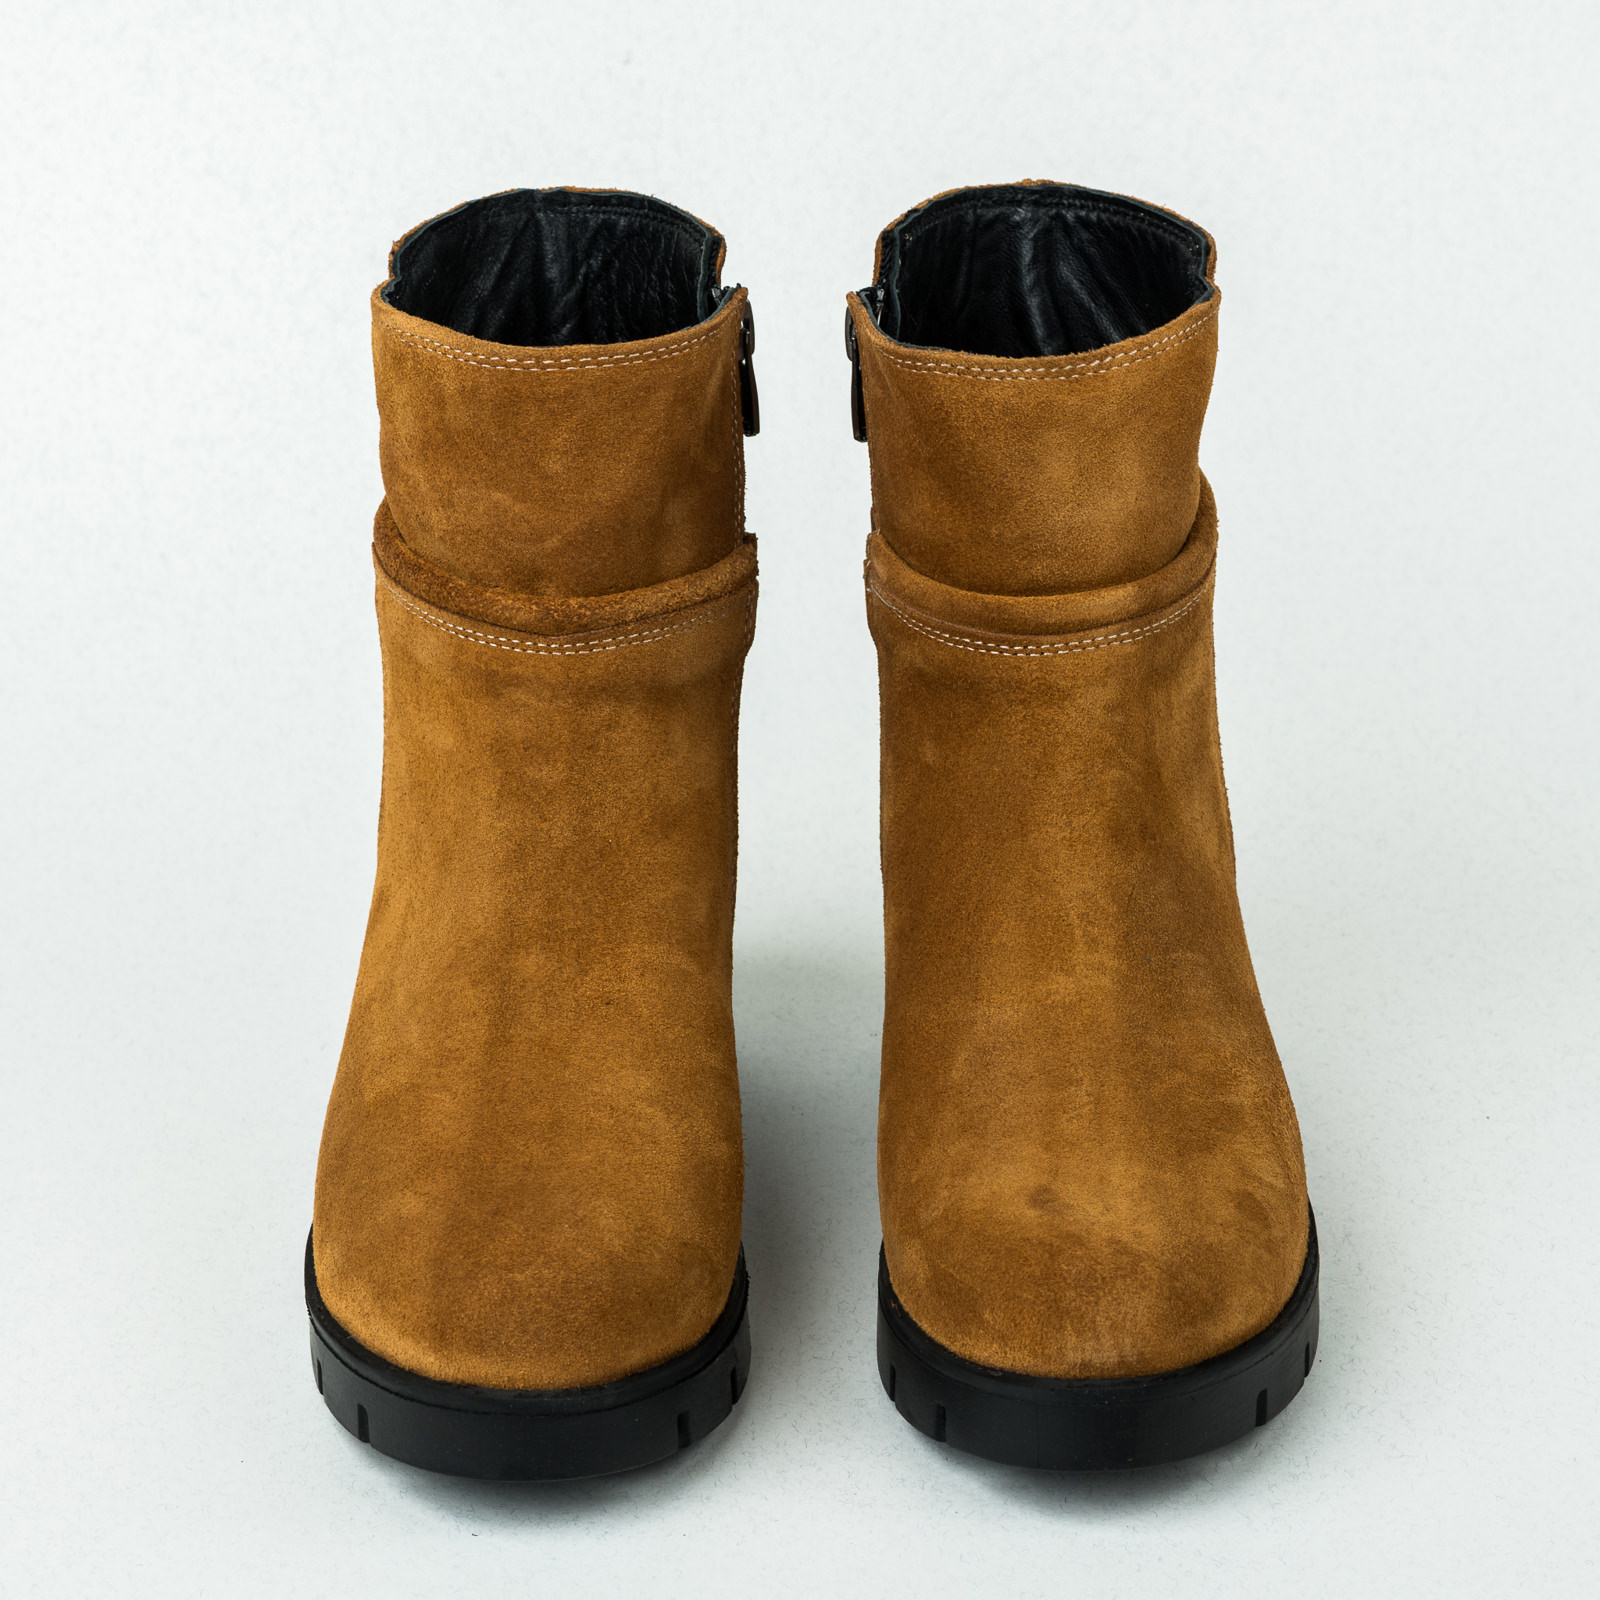 Leather ankle boots B042 - CAMEL